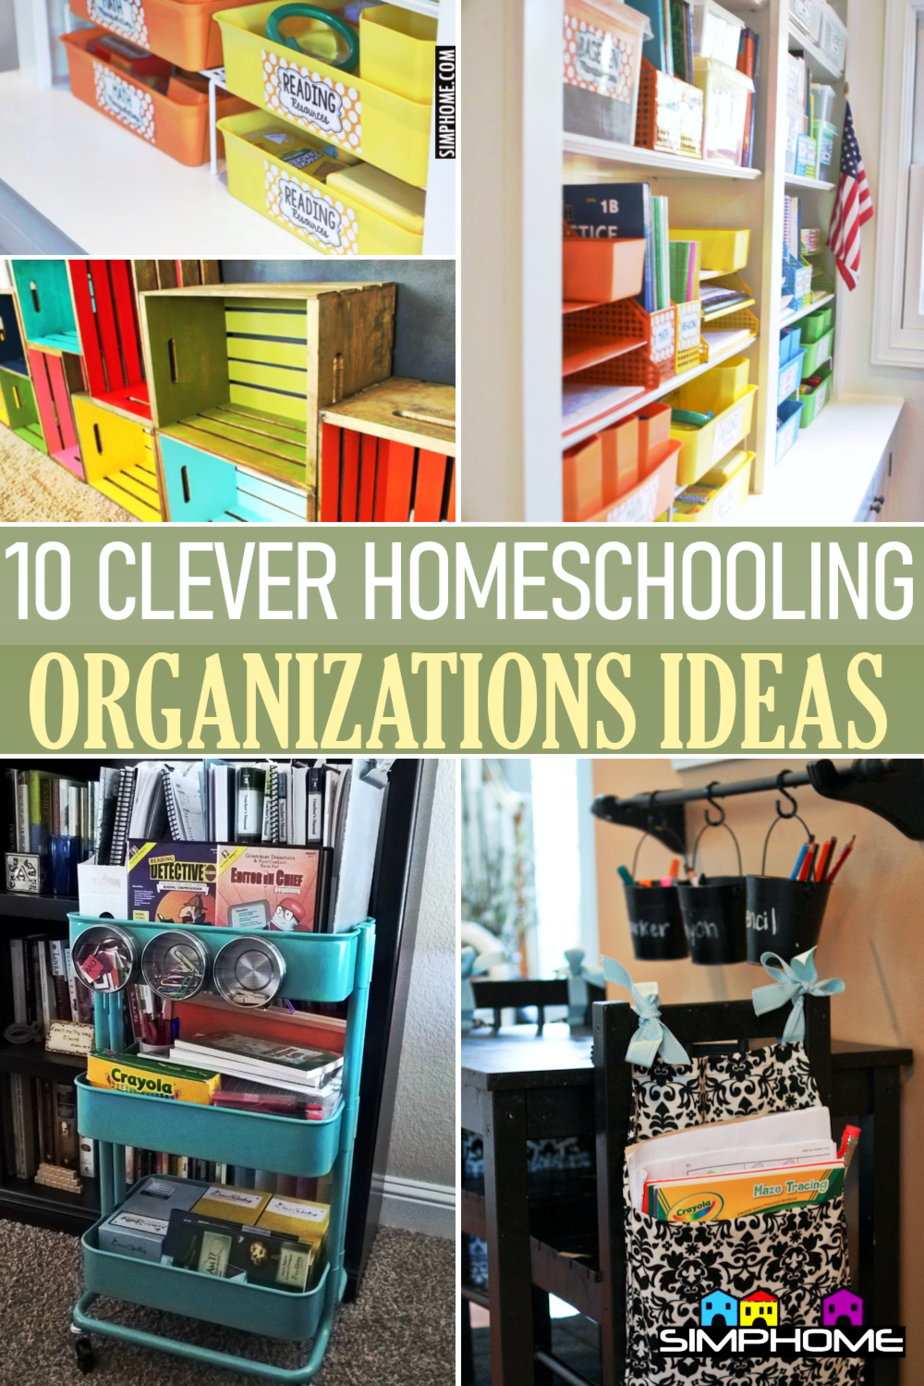 10 Clever Homeschooling Organization Ideas for Small Space via Simphome.comFeatured